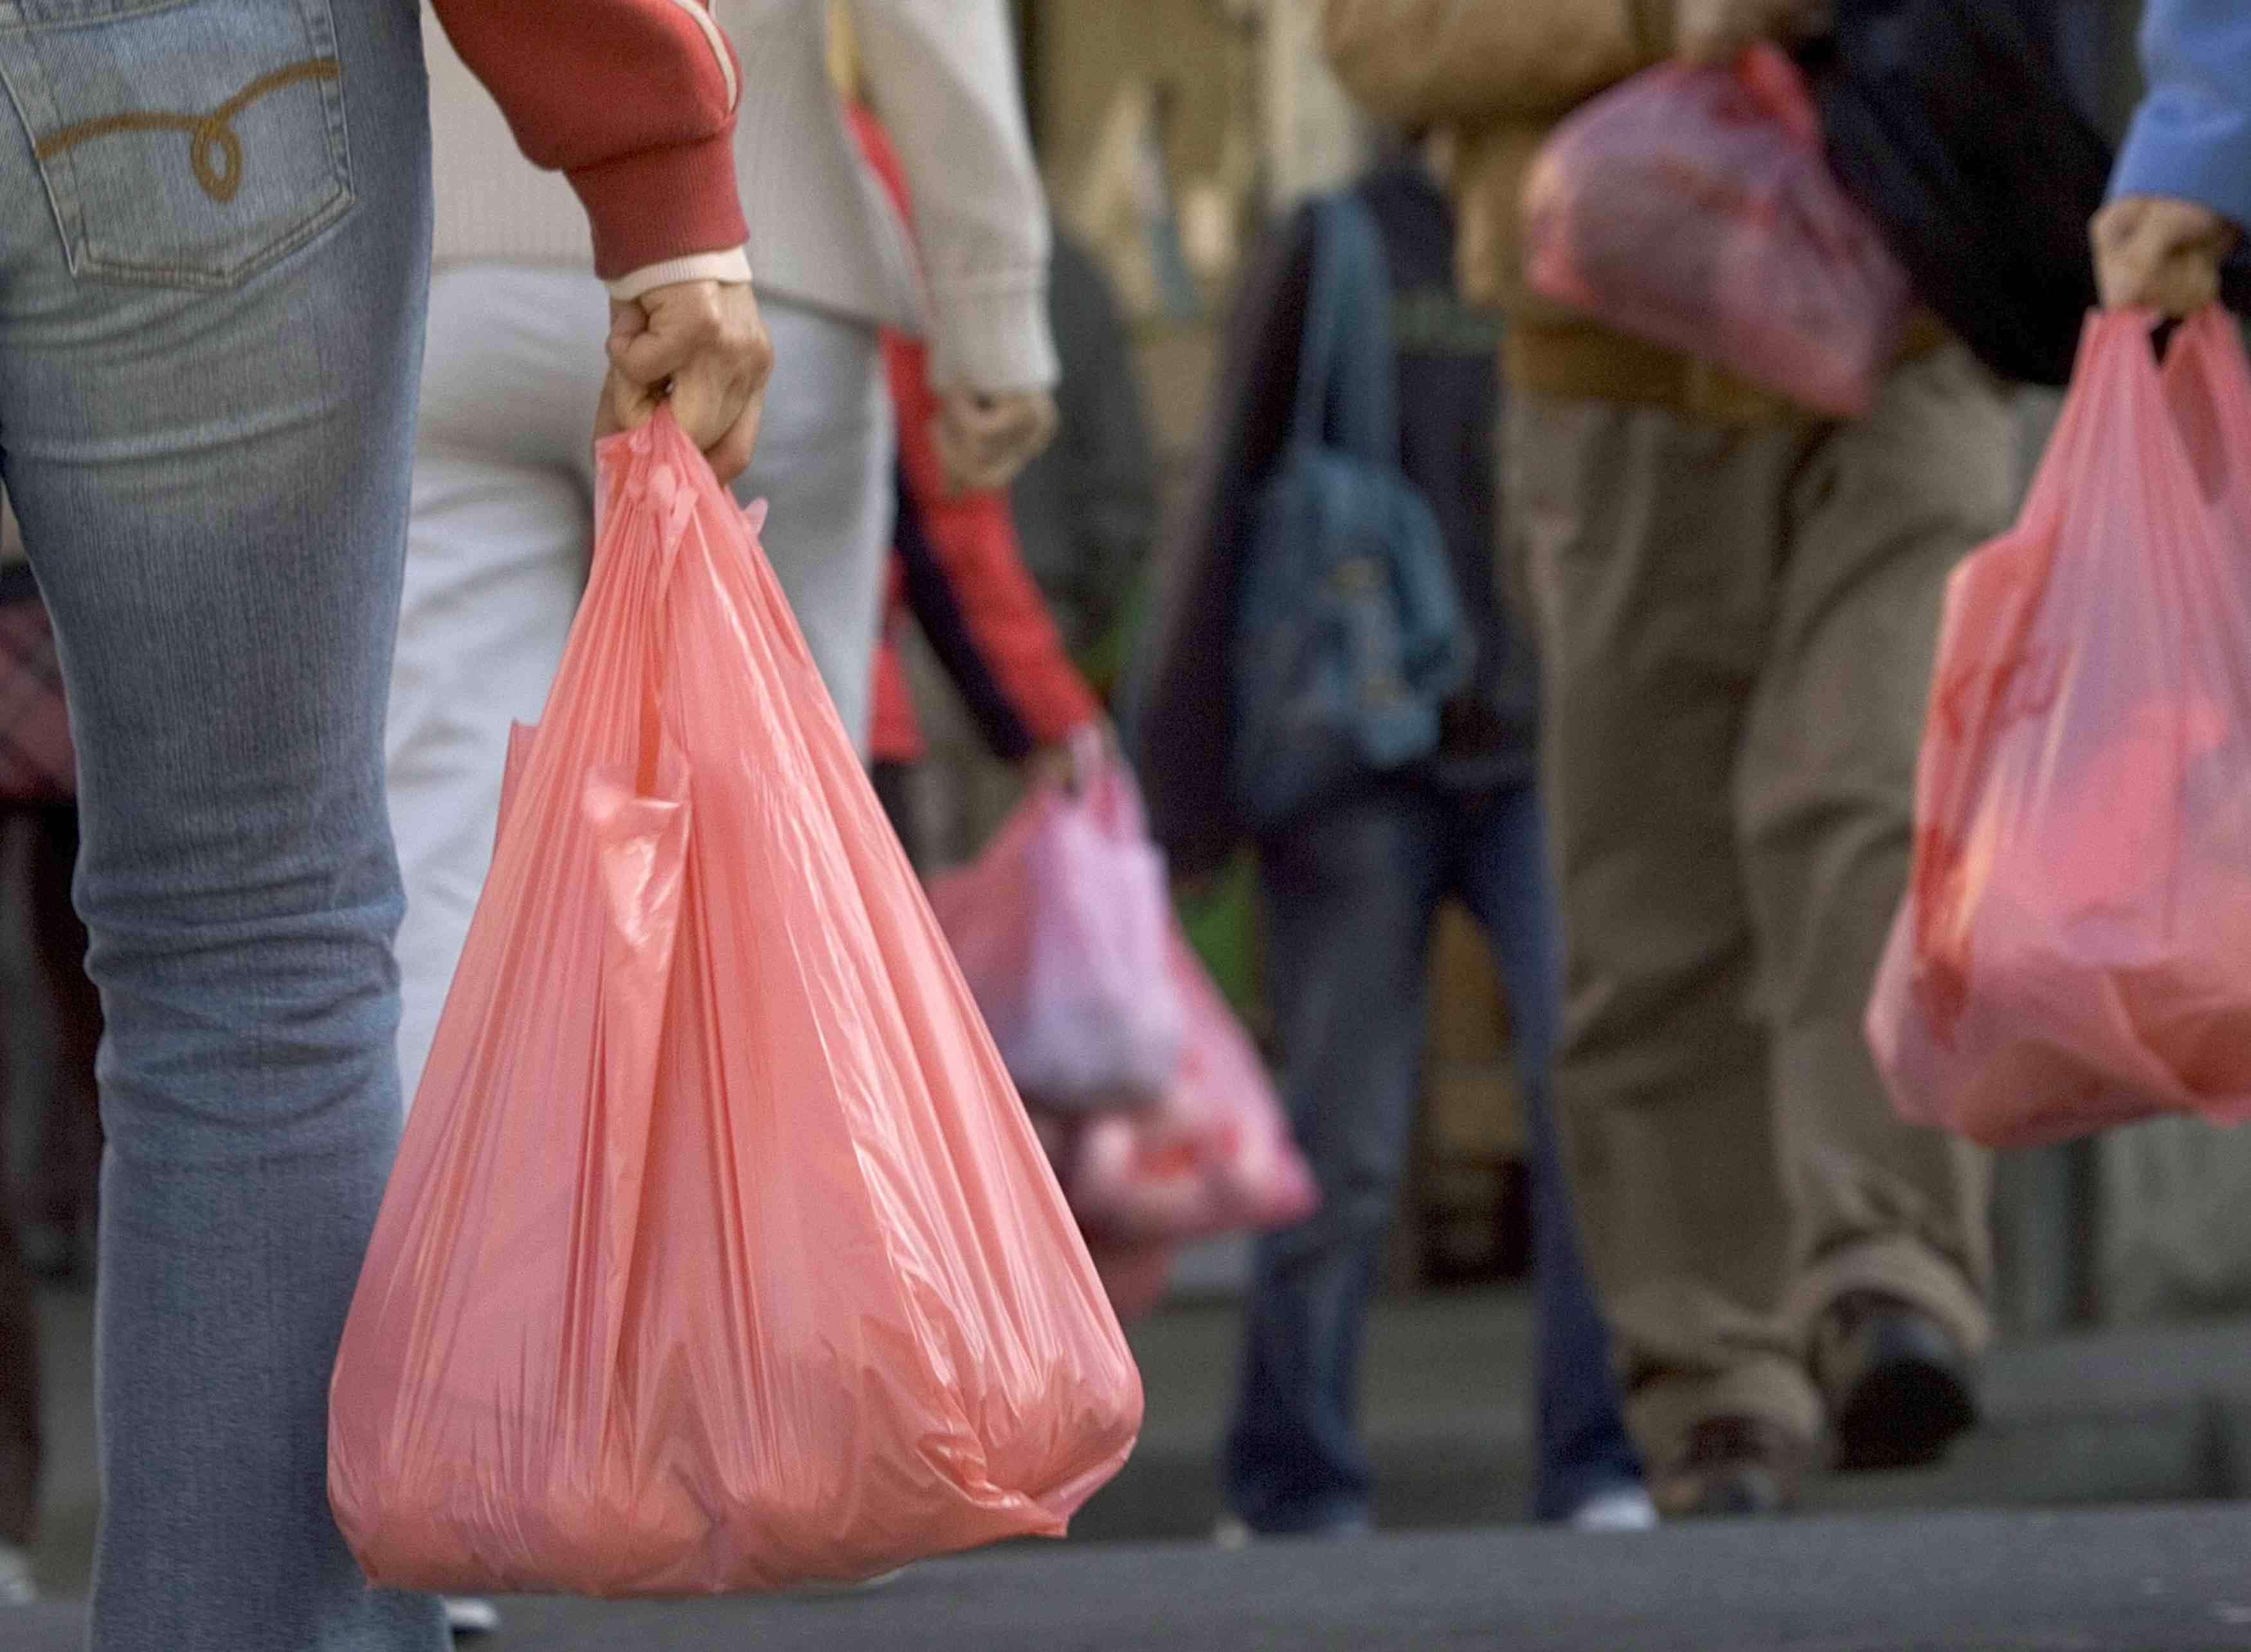 Should plastic shopping bags be banned? - CBS News